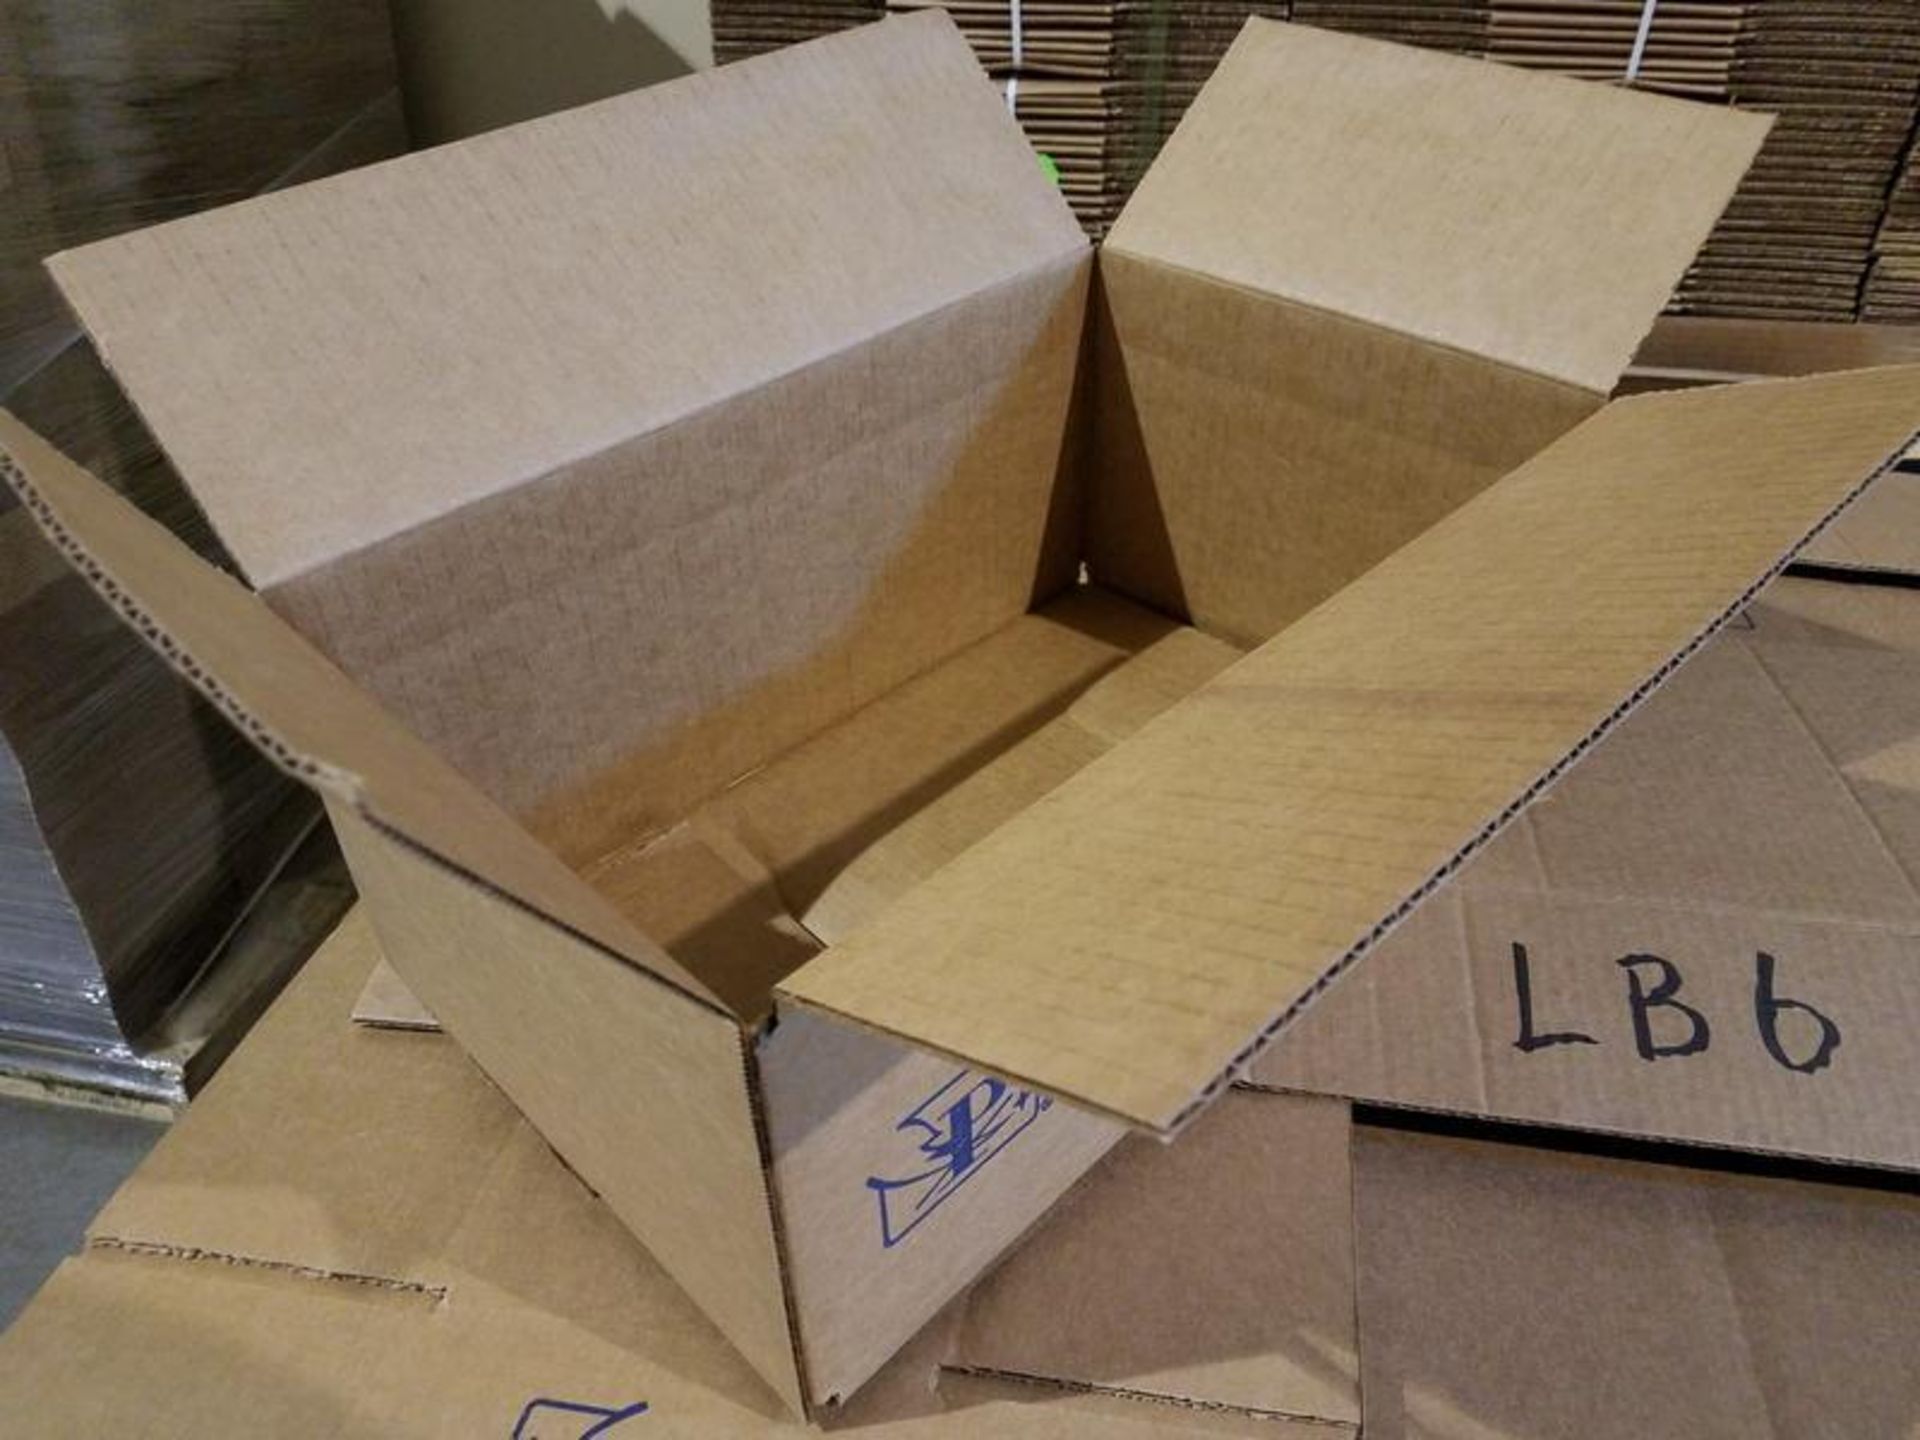 Lot JSP-LB6 Corrugated Boxes, 14.25" x 6" x 6" Approx. - Image 2 of 2